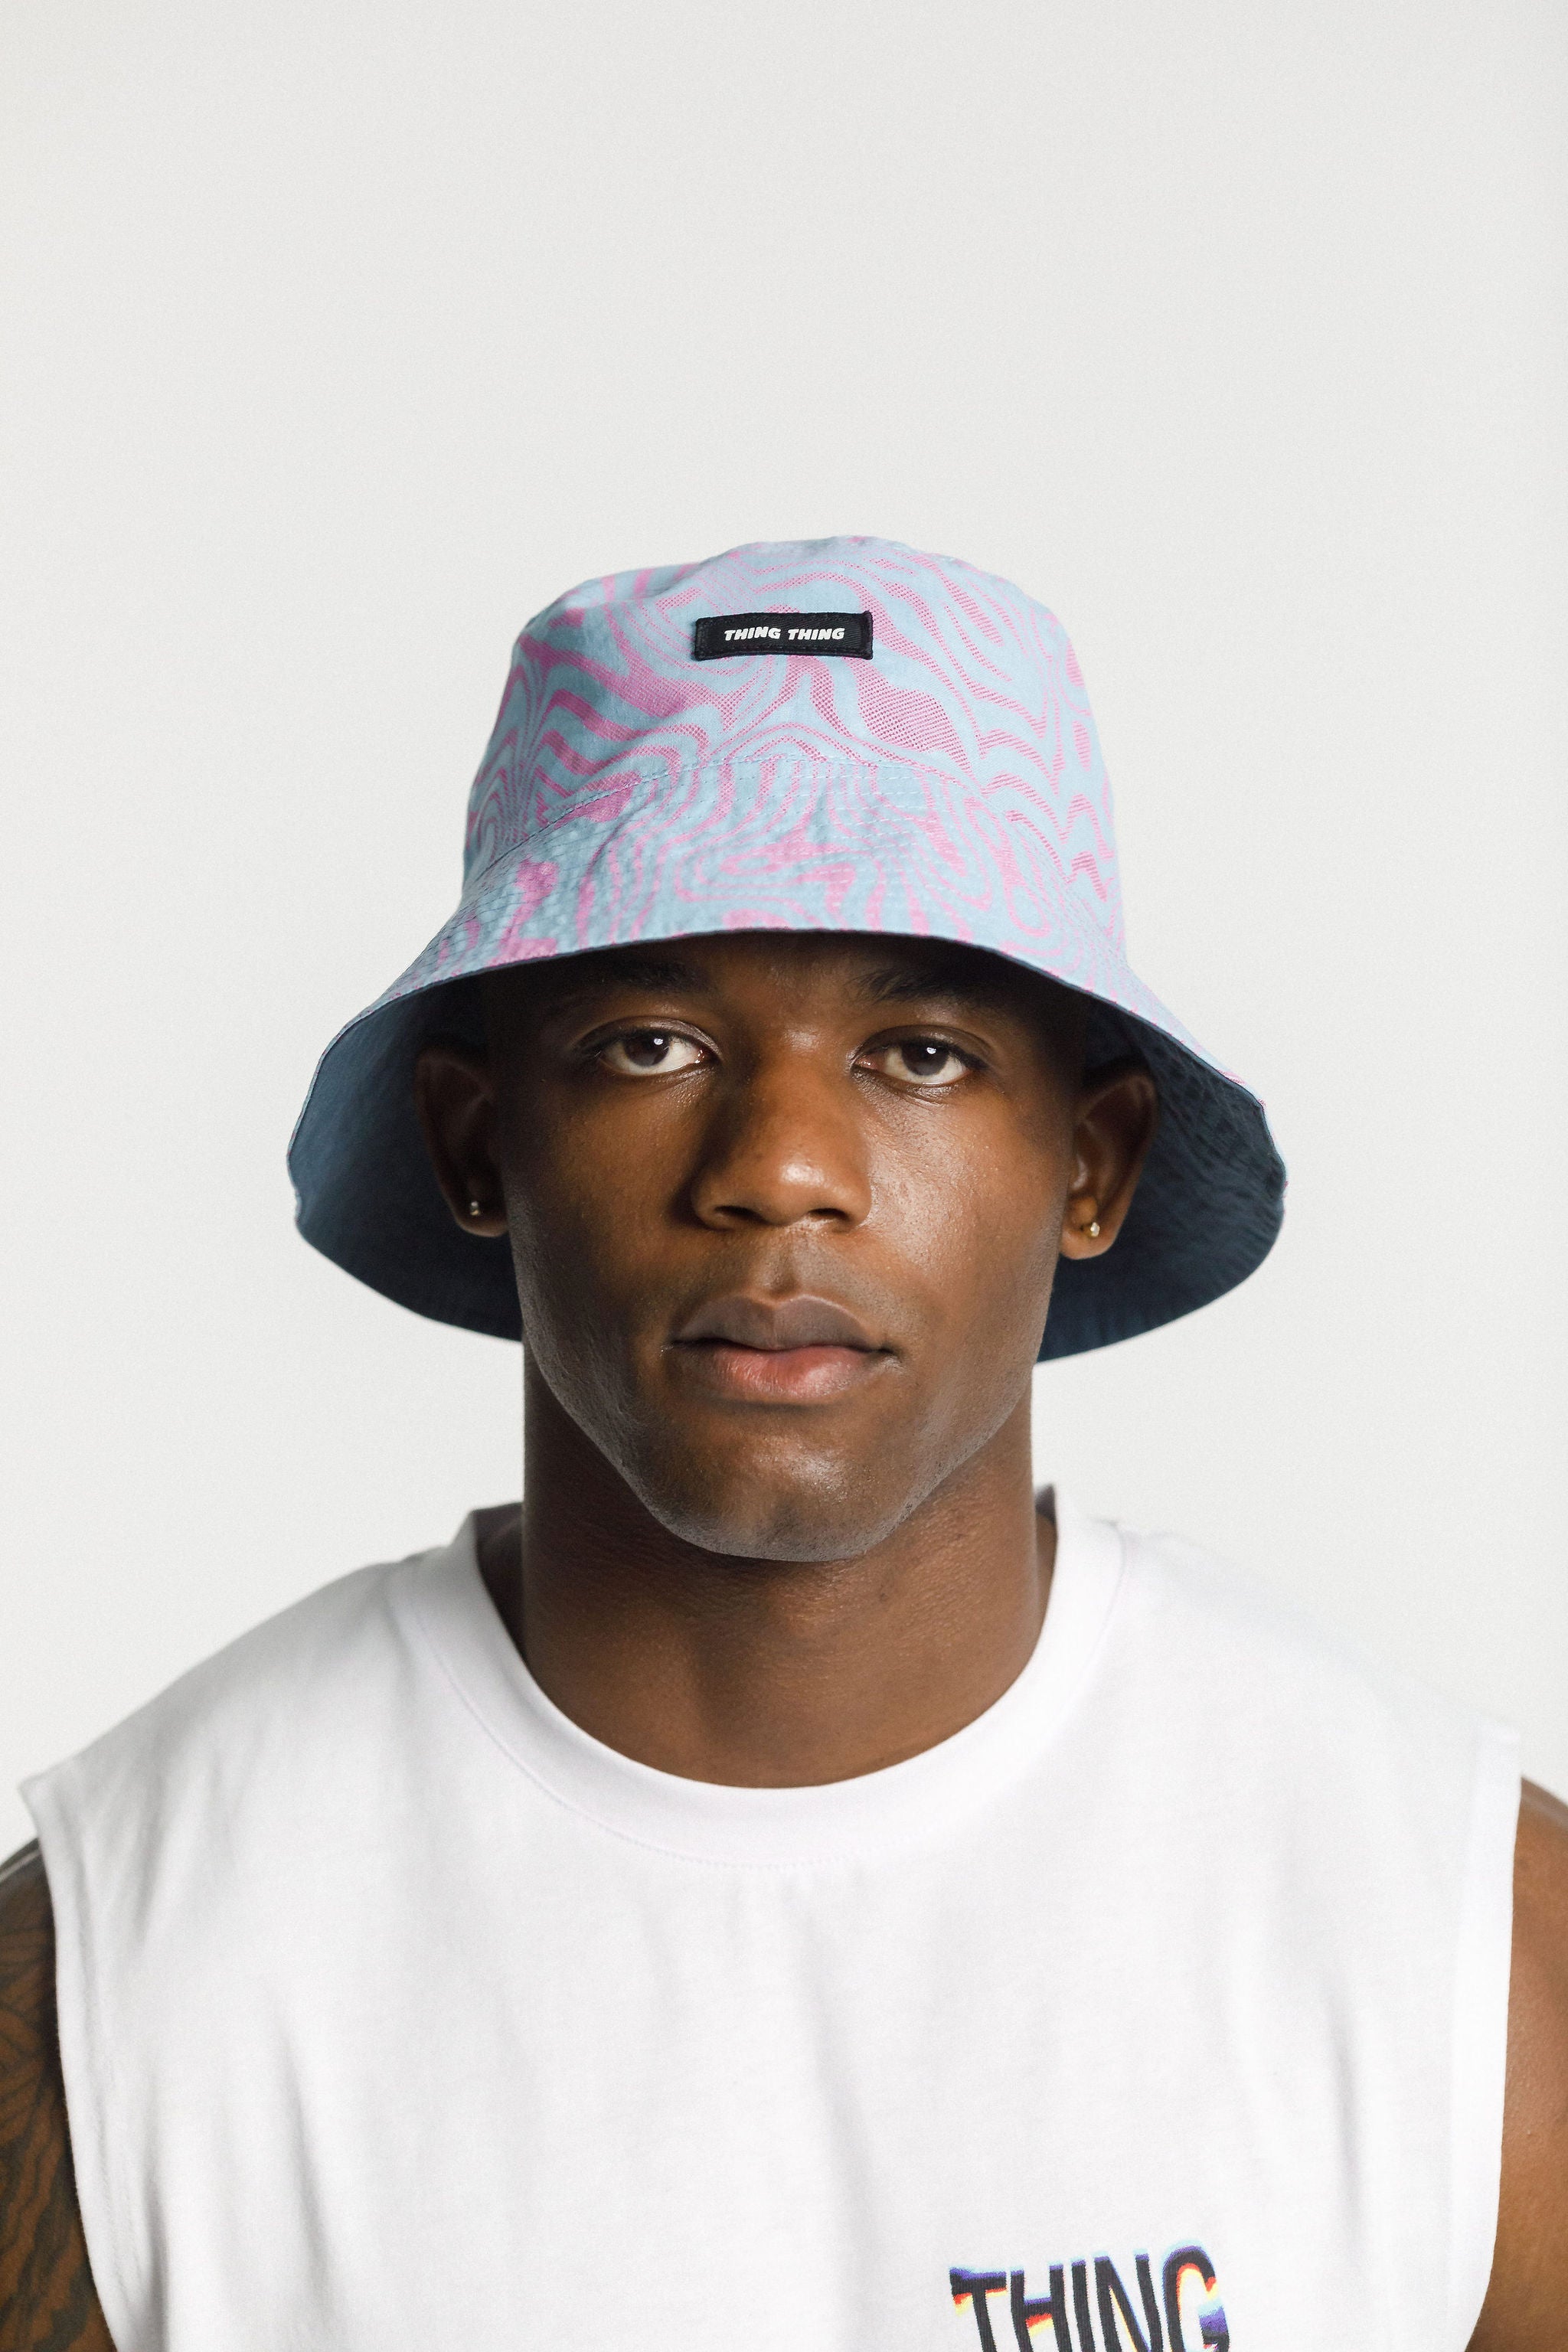 Reversible Bucket Hat - Sale - China Blue/Water